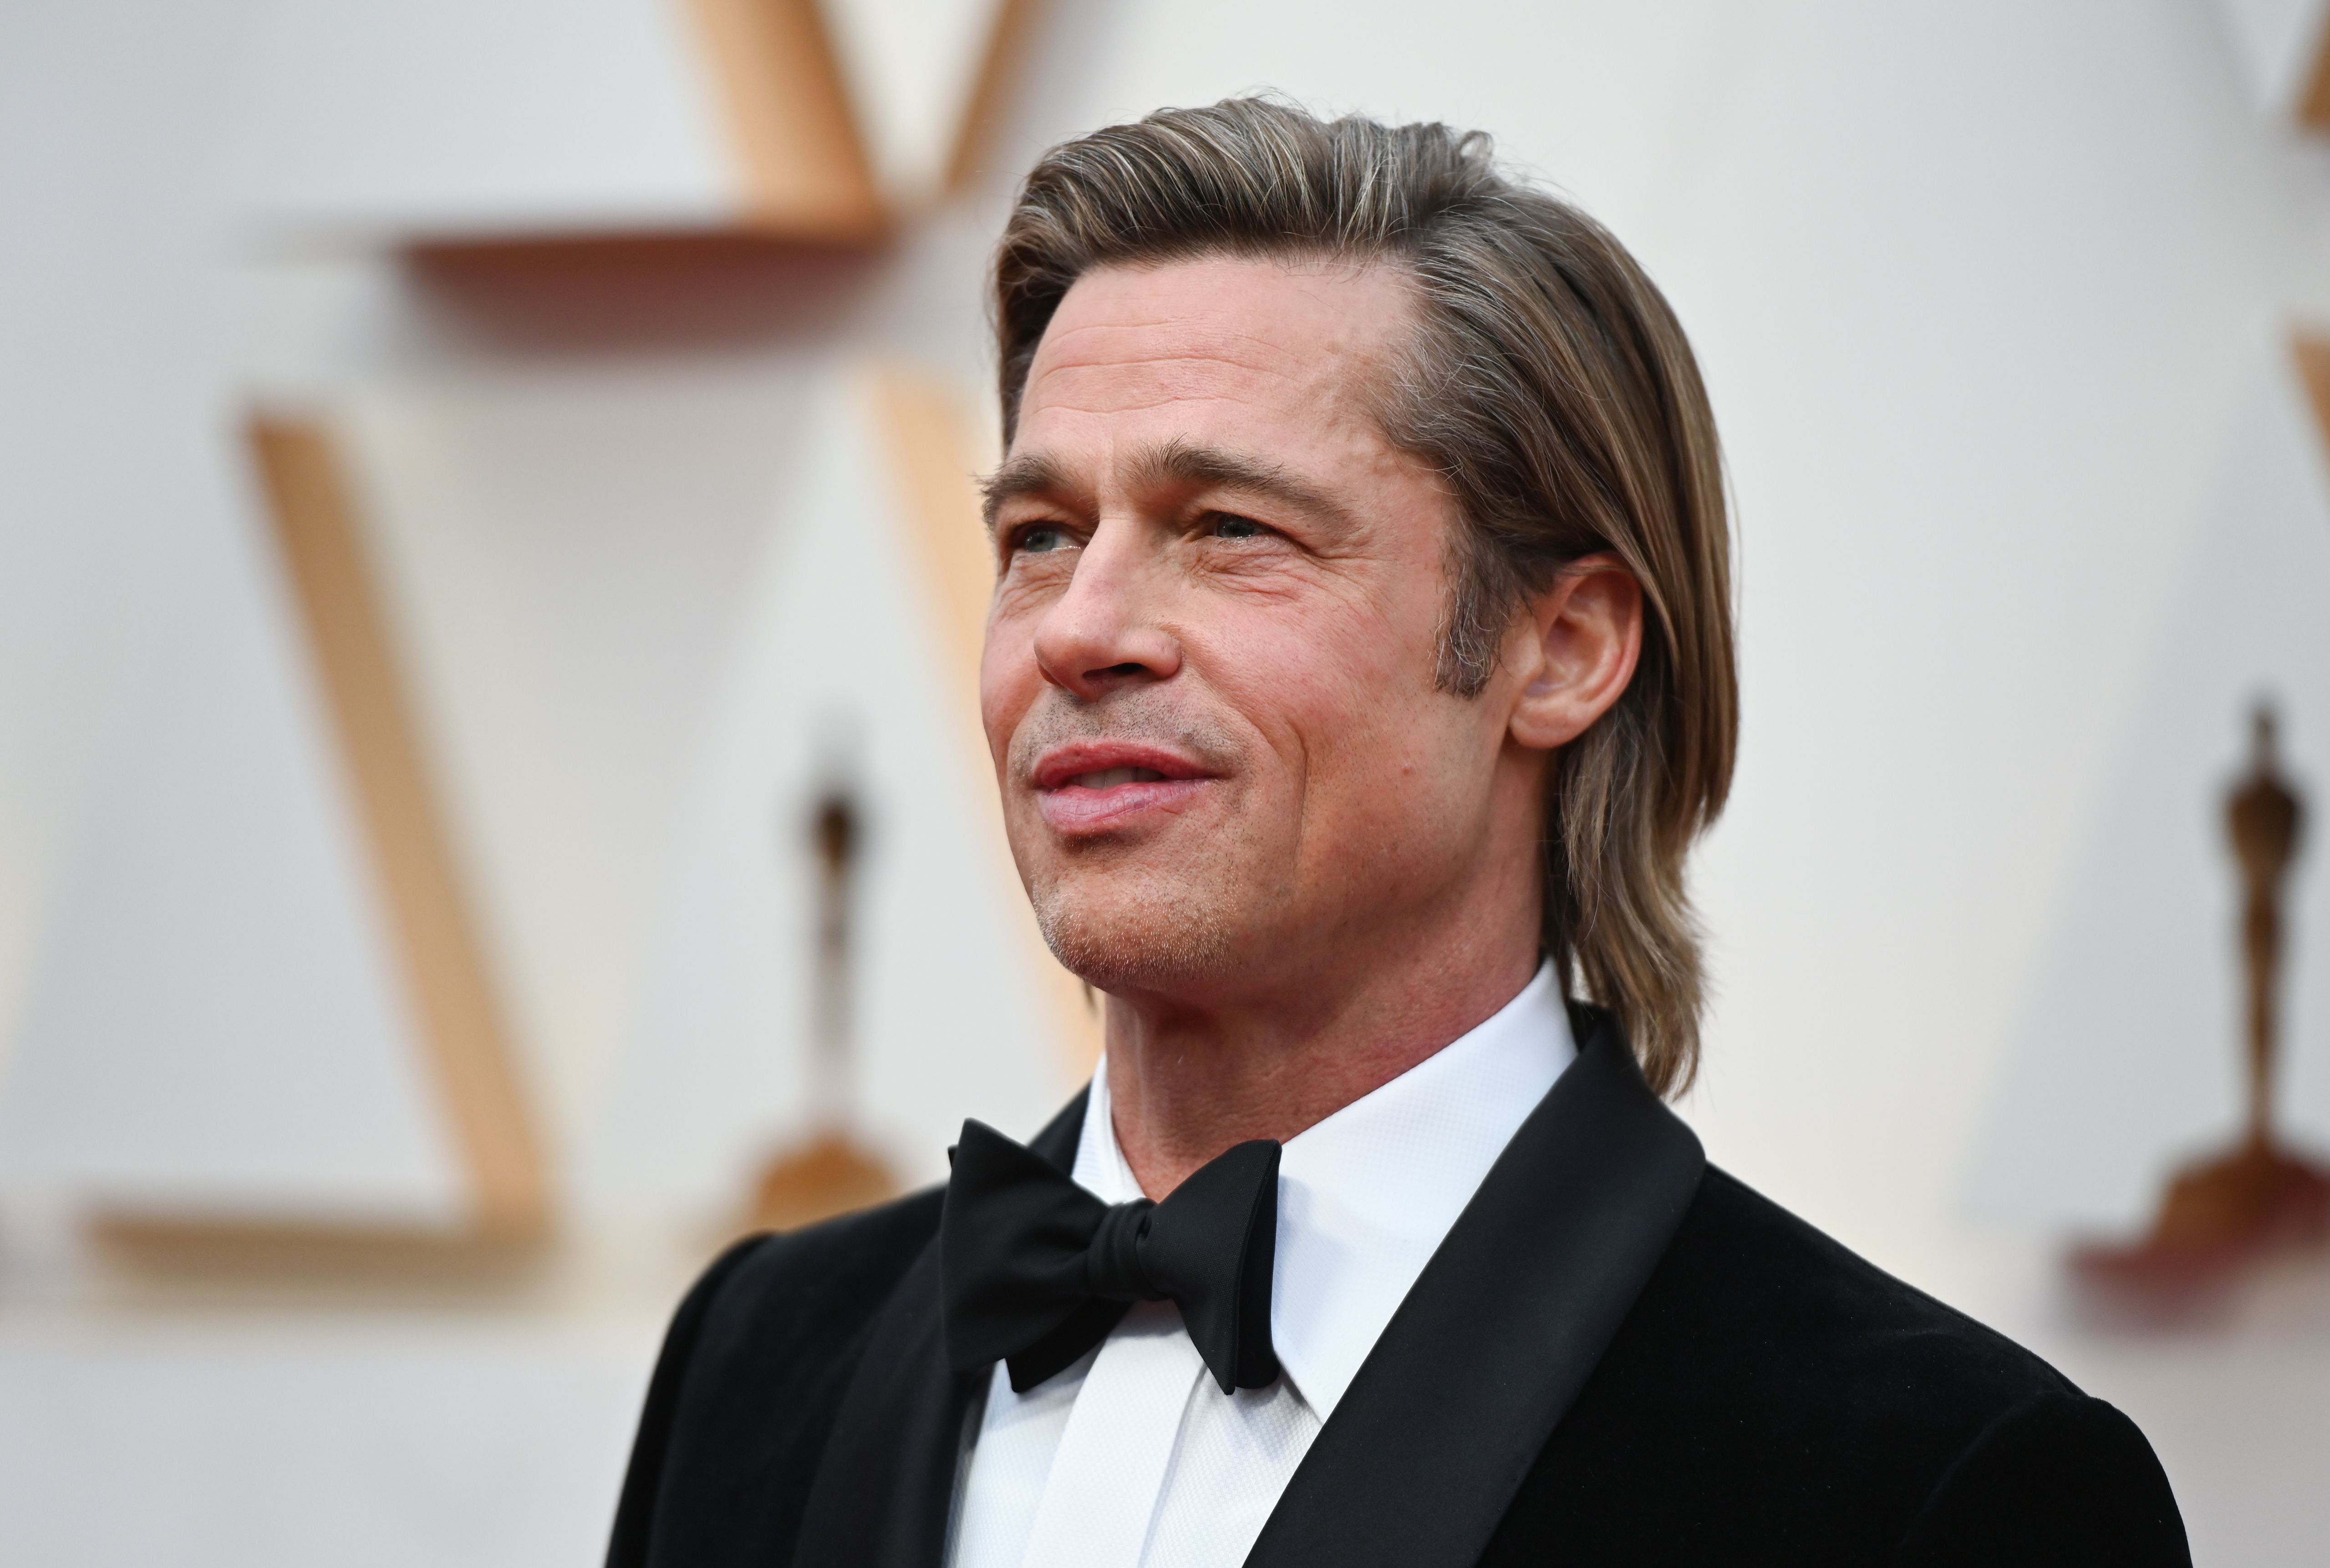 Brad Pitt arrives for the 92nd Oscars at the Dolby Theatre in Hollywood, California